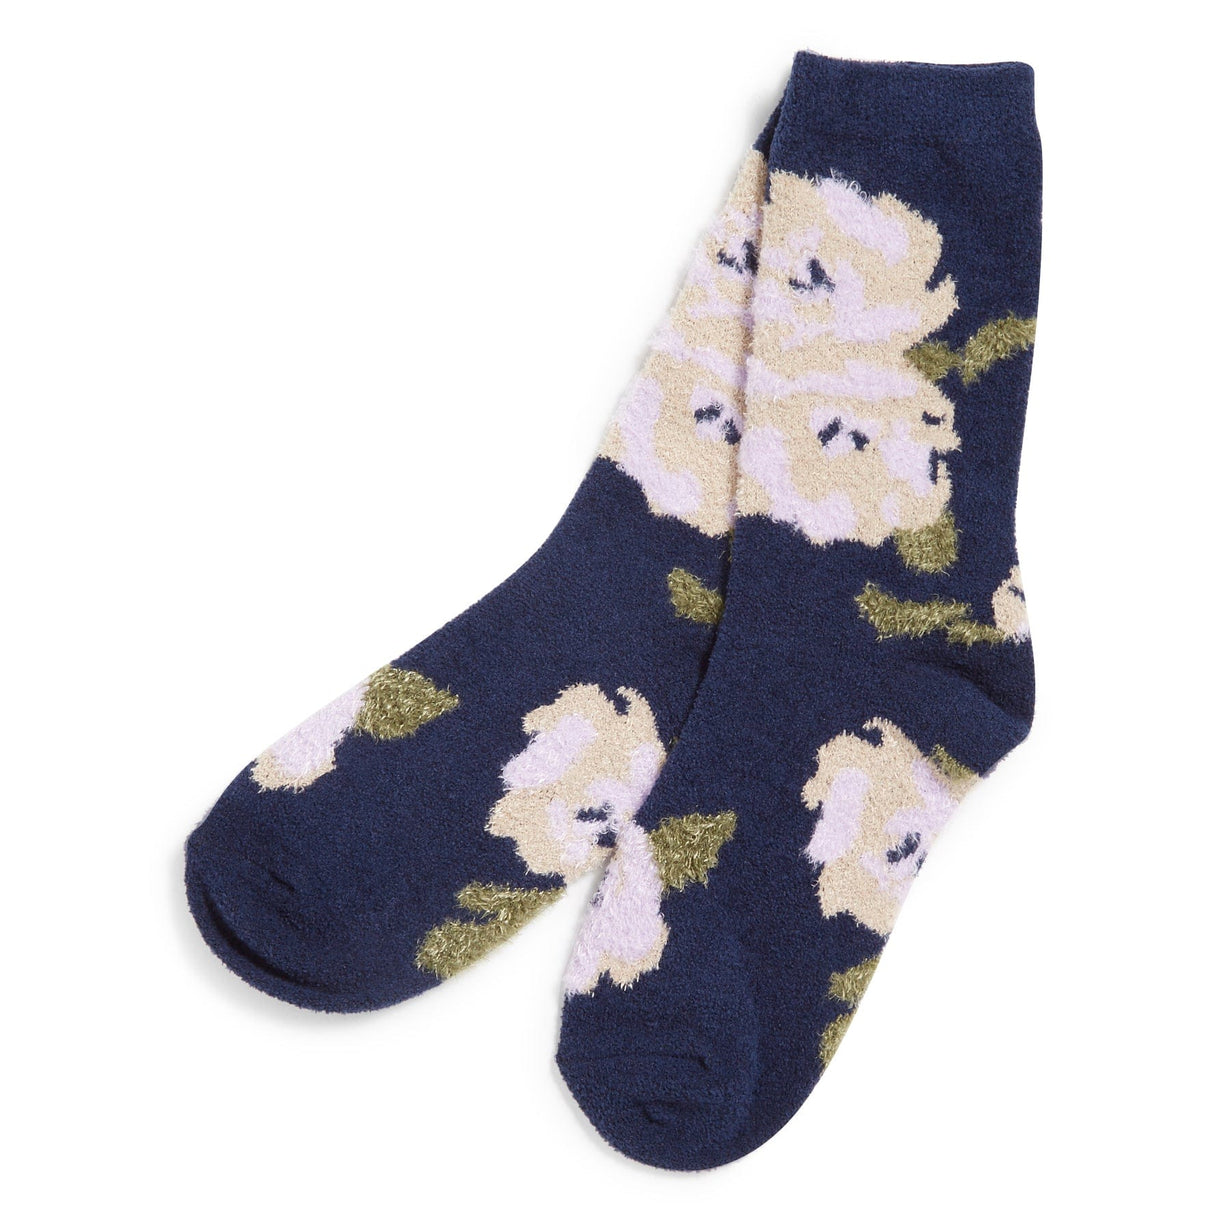 navy blue fleece socks with white floral pattern